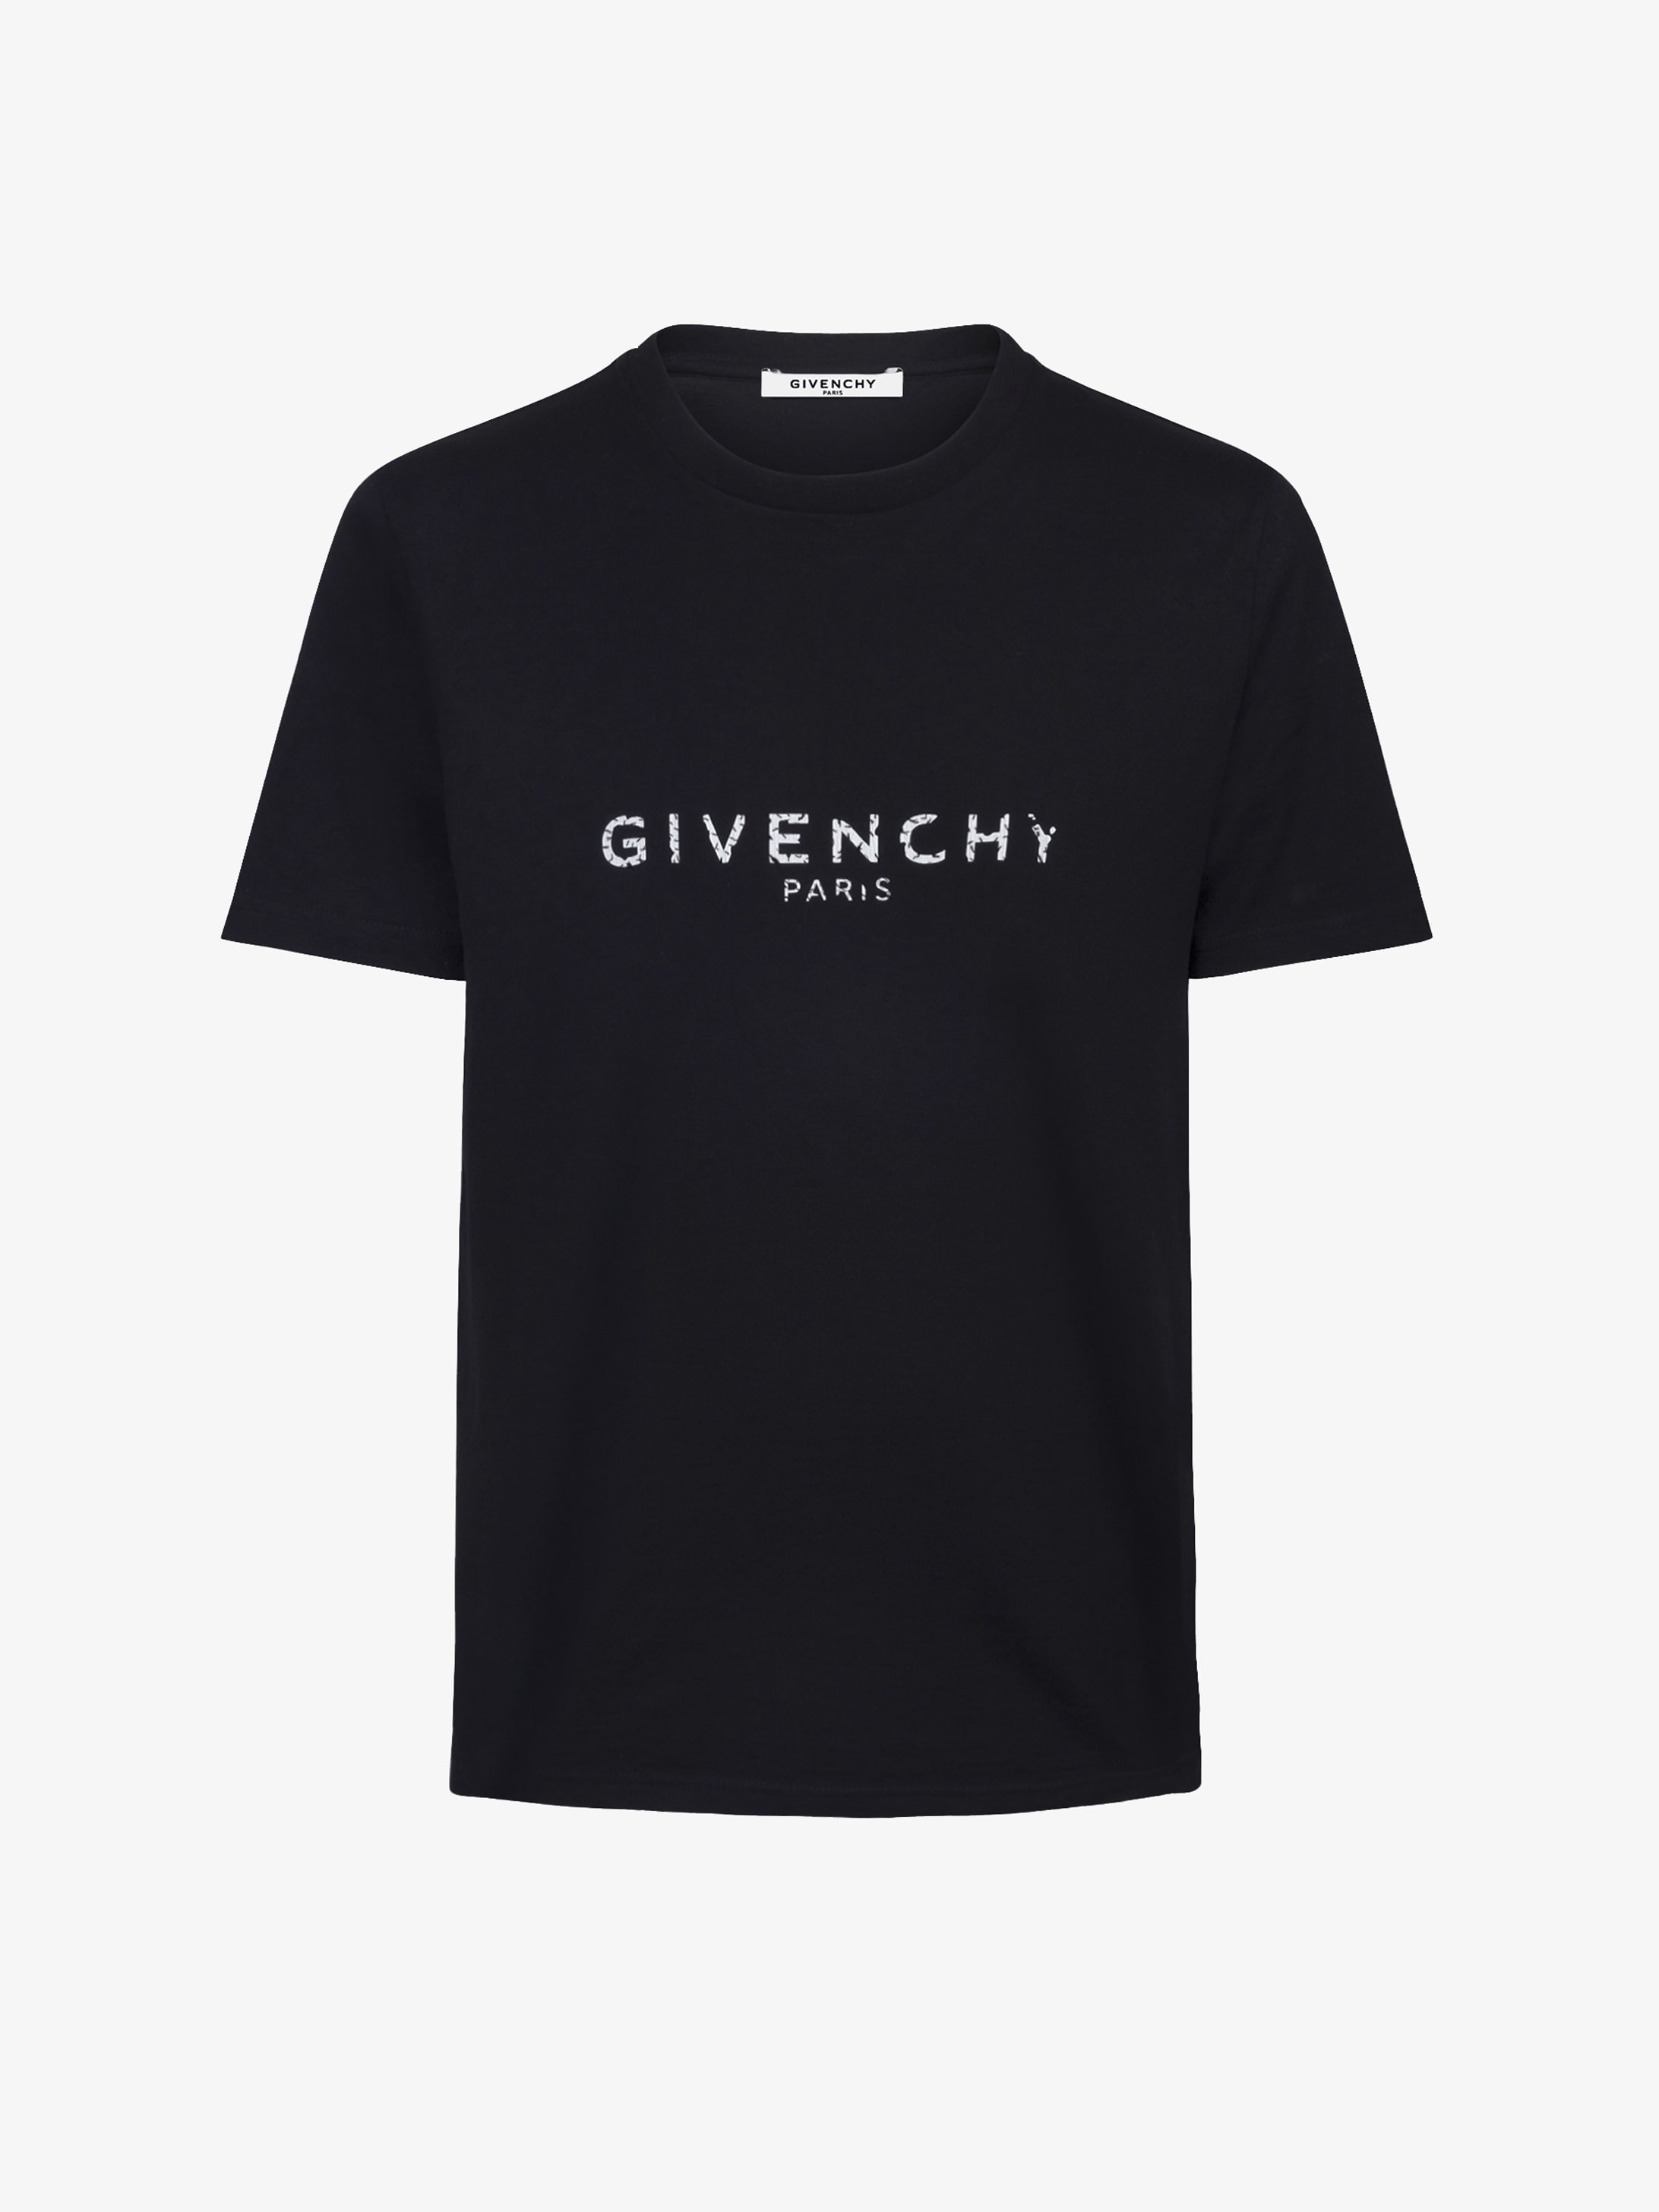 Stick truth givenchy paris vintage oversized t shirt tampa evening online